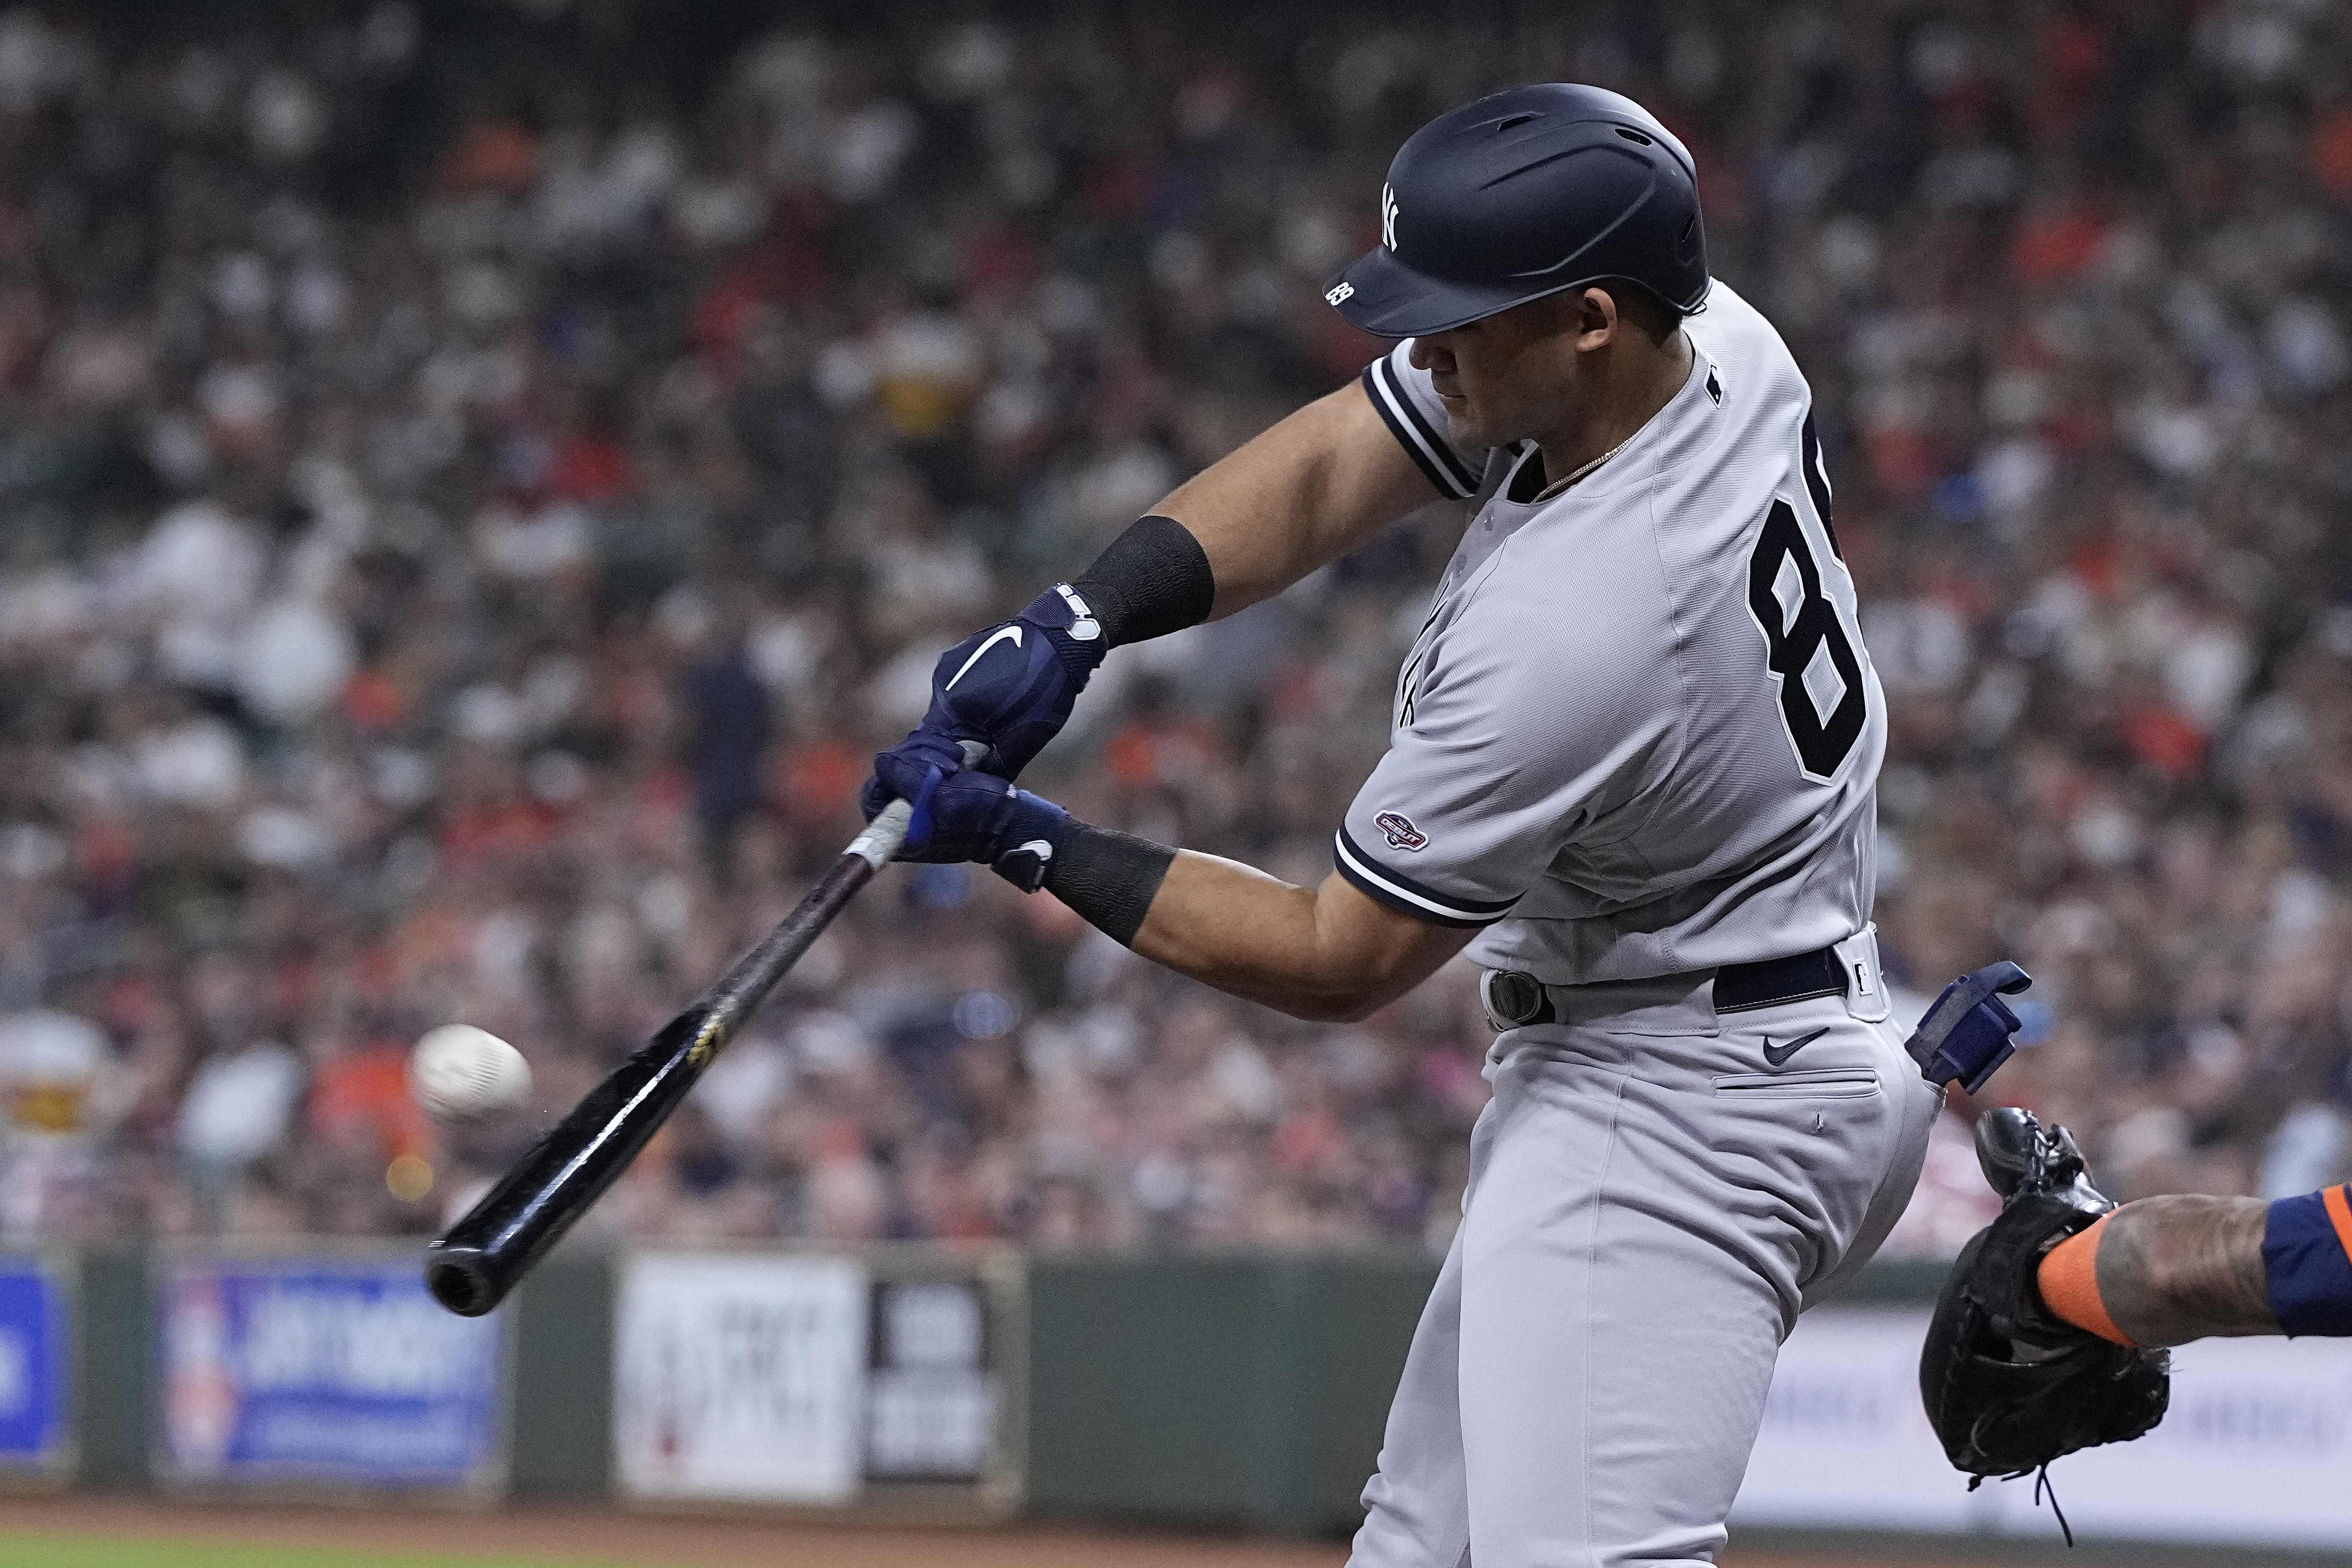 Yankees' Judge becomes fastest MLB player to 250 home runs with a